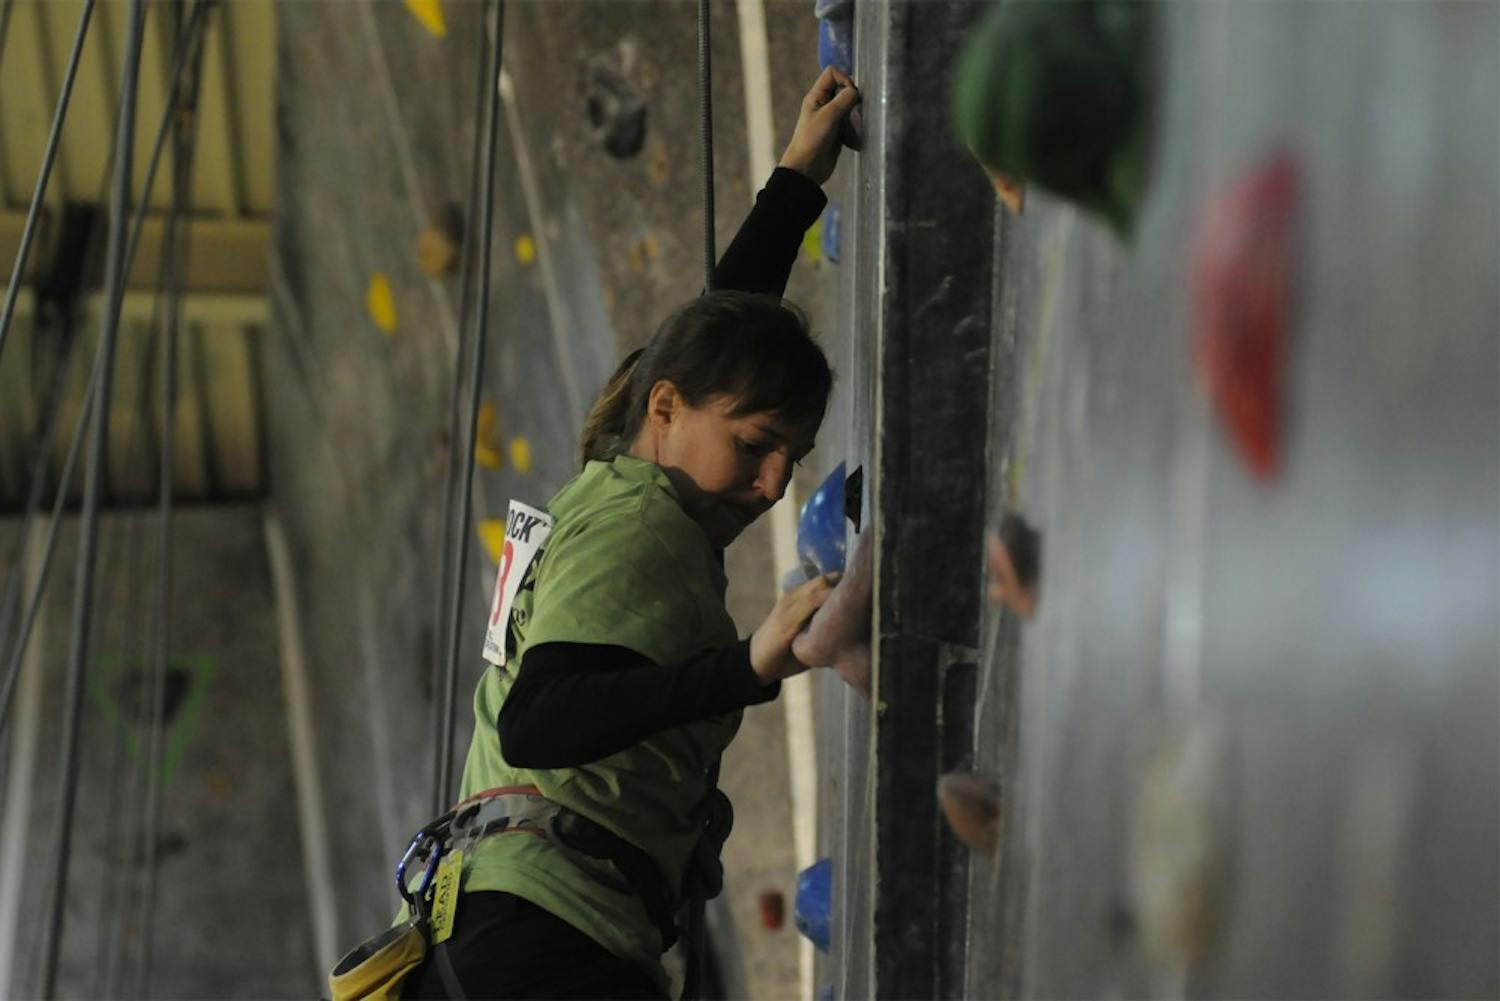 This weekend the Chapel Hill Community Center held the 25th Anniversary Dixie Rock Climbing Competition.  Kat Richards, a regular at the community center and a Chapel Hill native, is seen climbing one of the 17 wall routes.  Individuals received points for each route they completed.